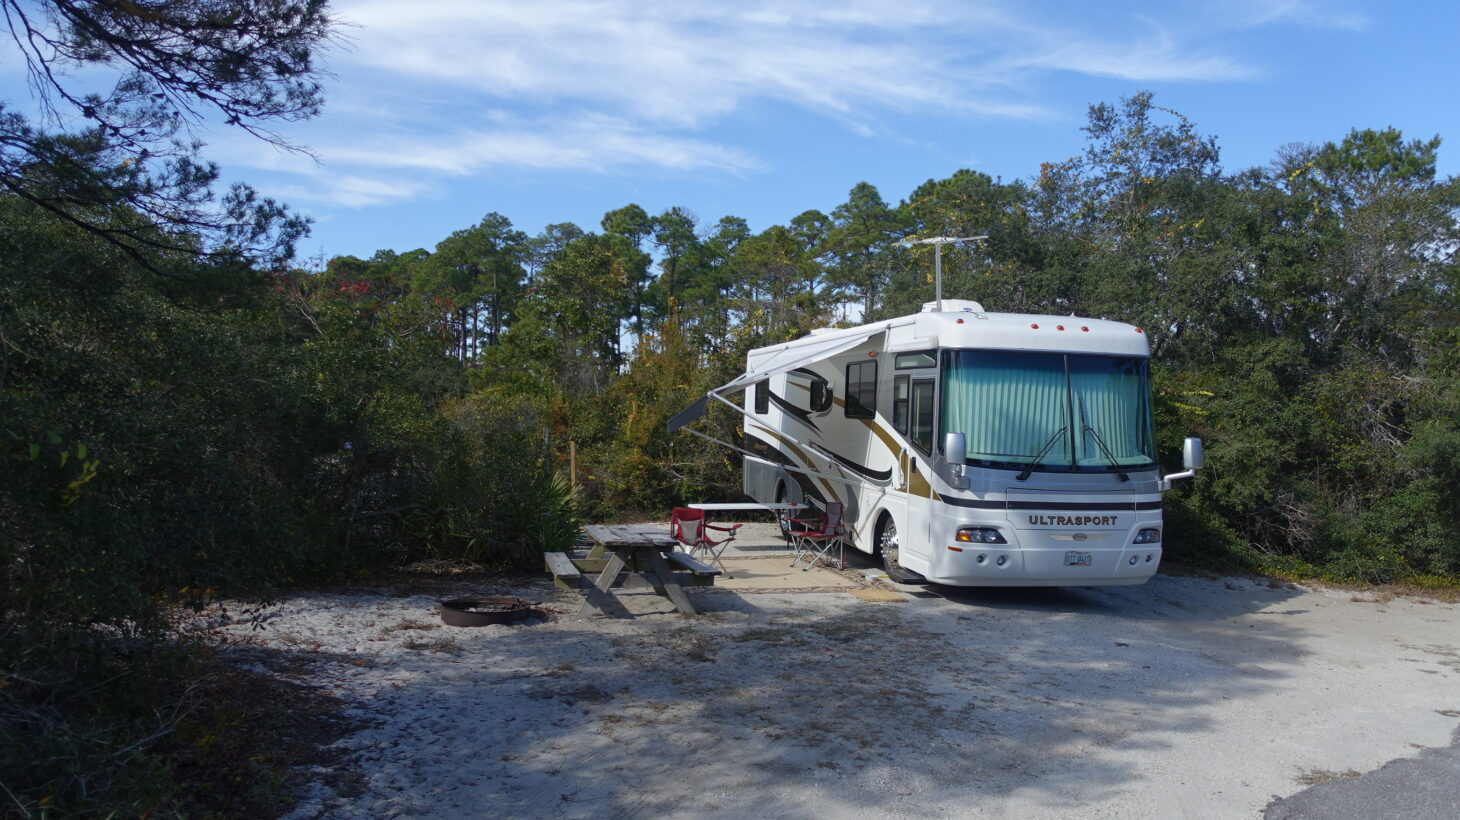 Large motorhome parked at a sandy campsite with a wooded area behind it